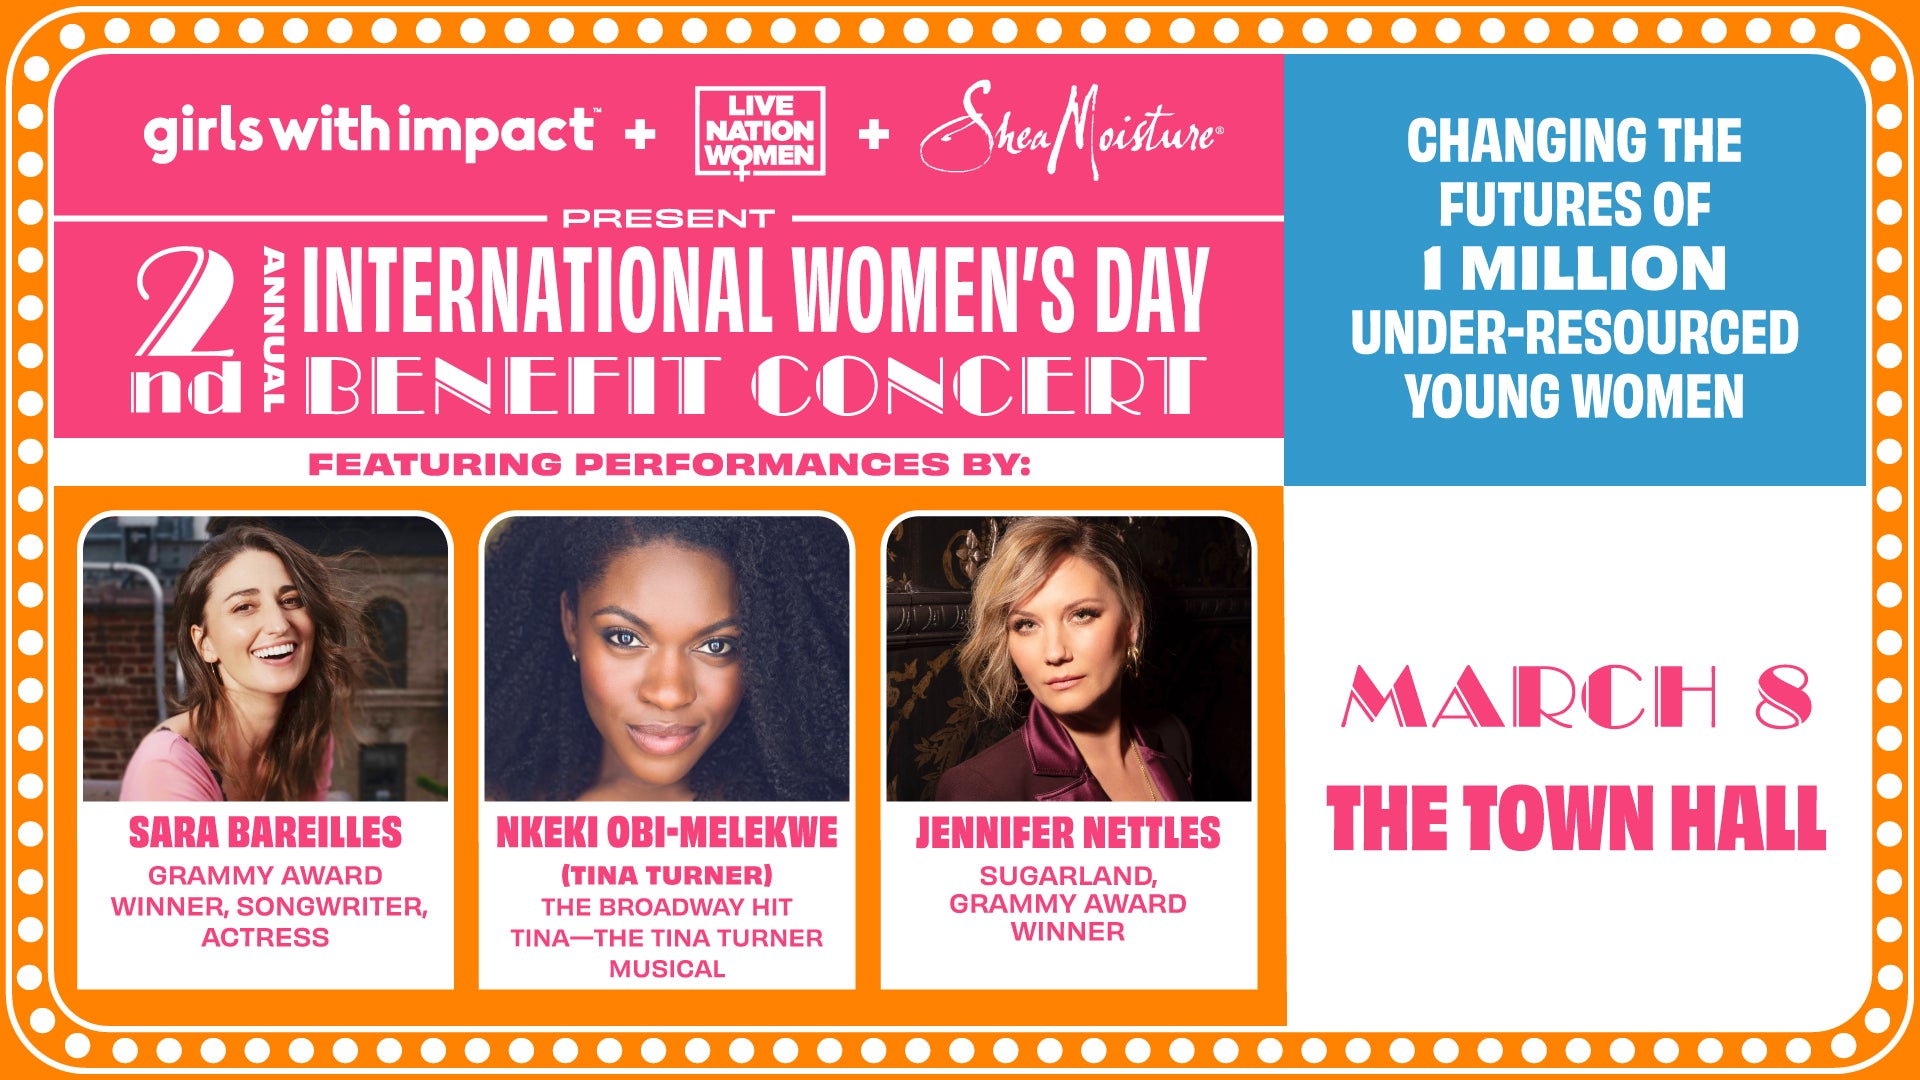 GIRLS WITH IMPACT PRESENTS 2ND ANNUAL INTERNATIONAL WOMEN’S DAY BENEFIT CONCERT